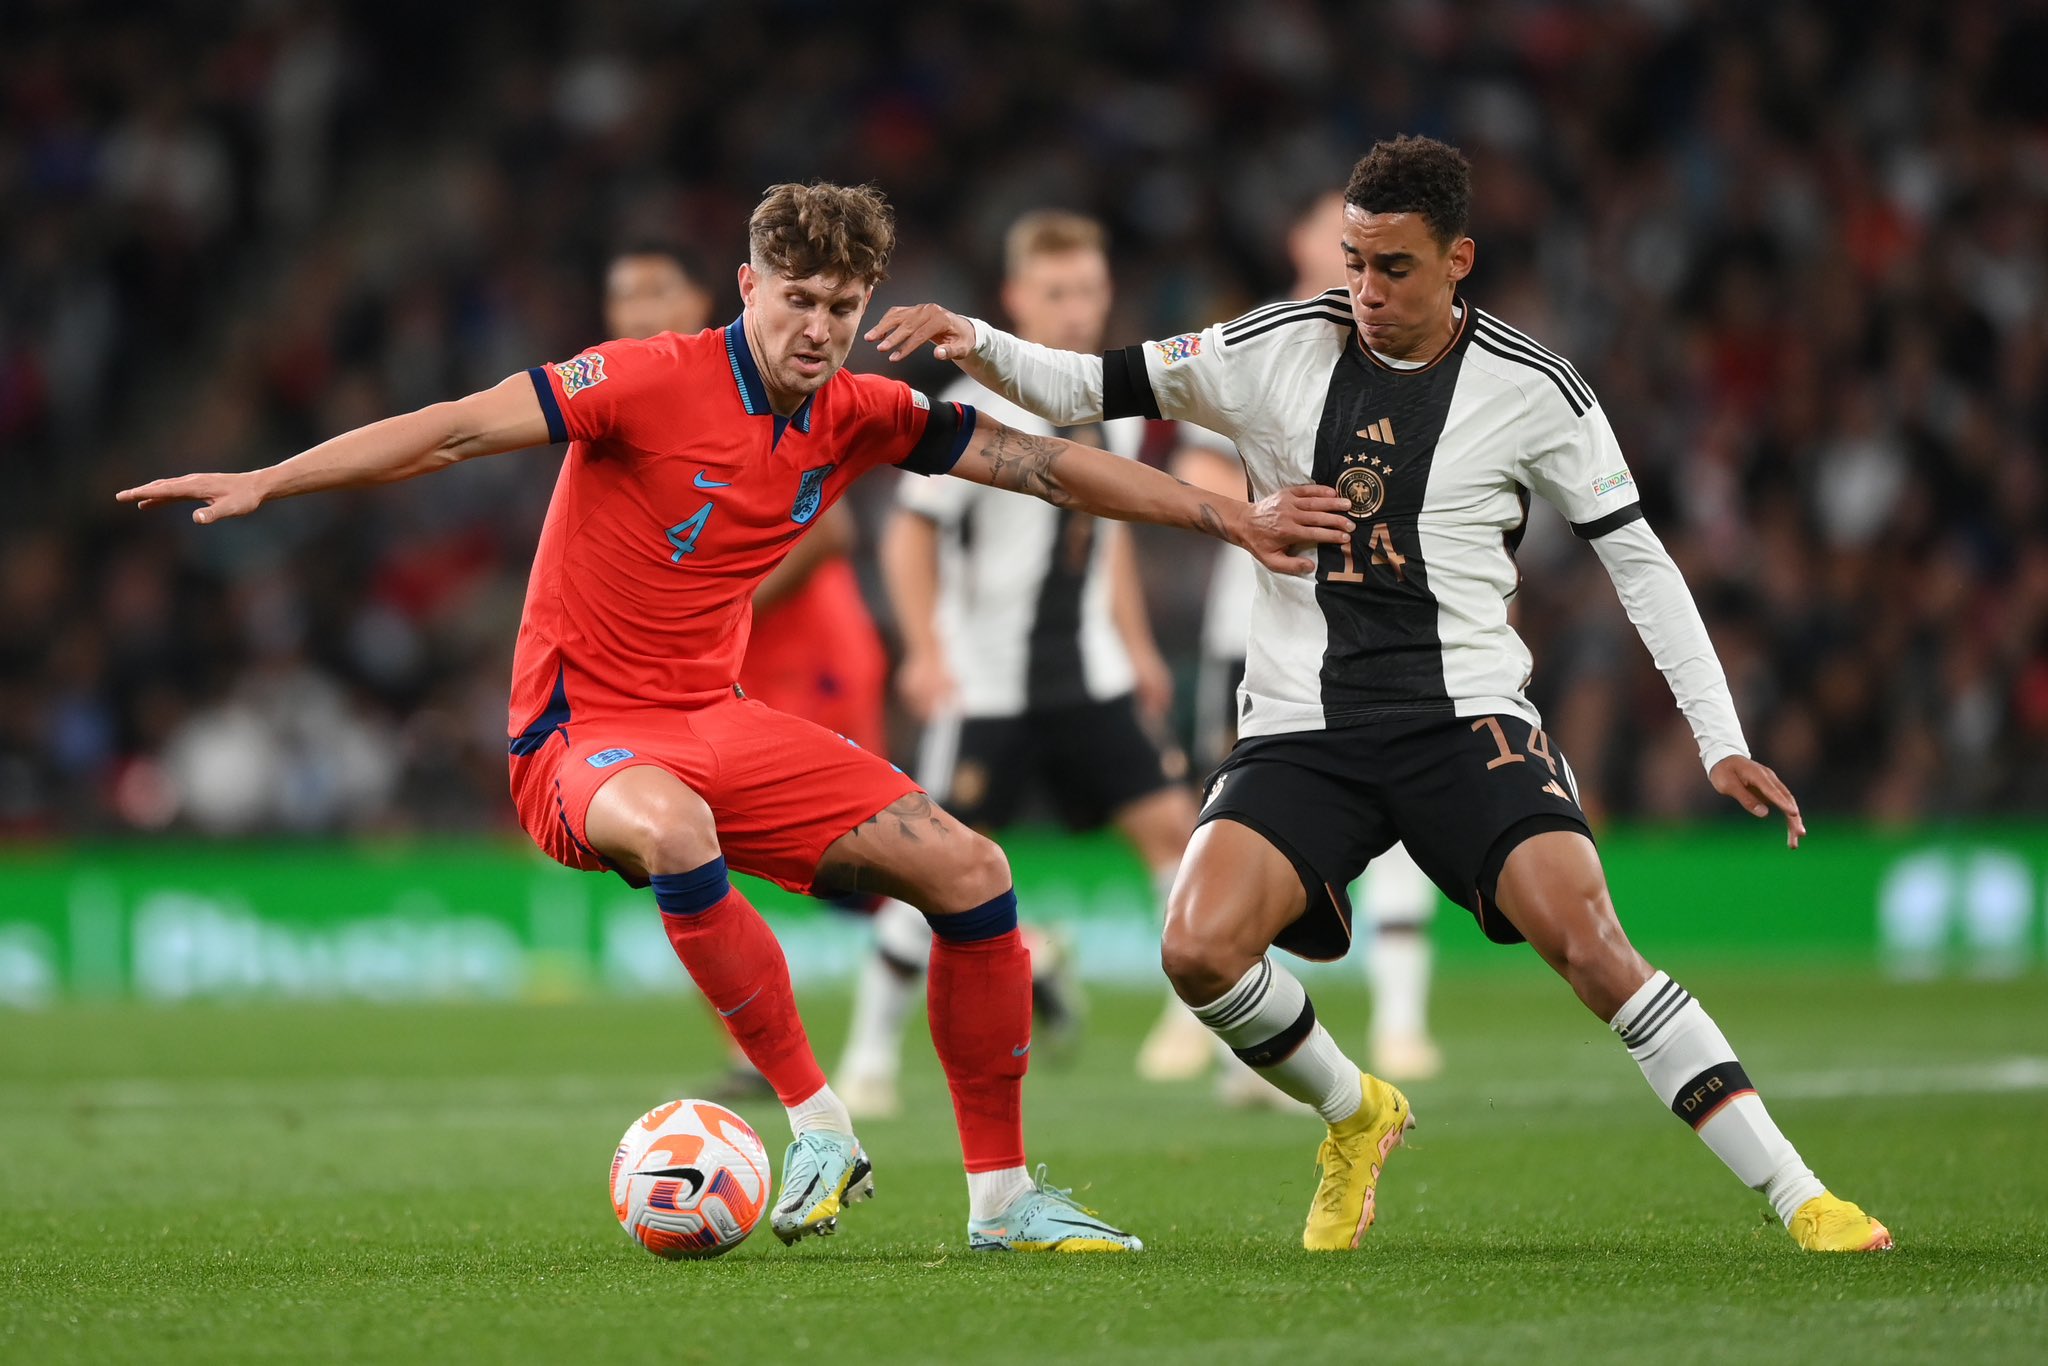 The scoreline was deadlocked at Wembley in the first half between England and Germany